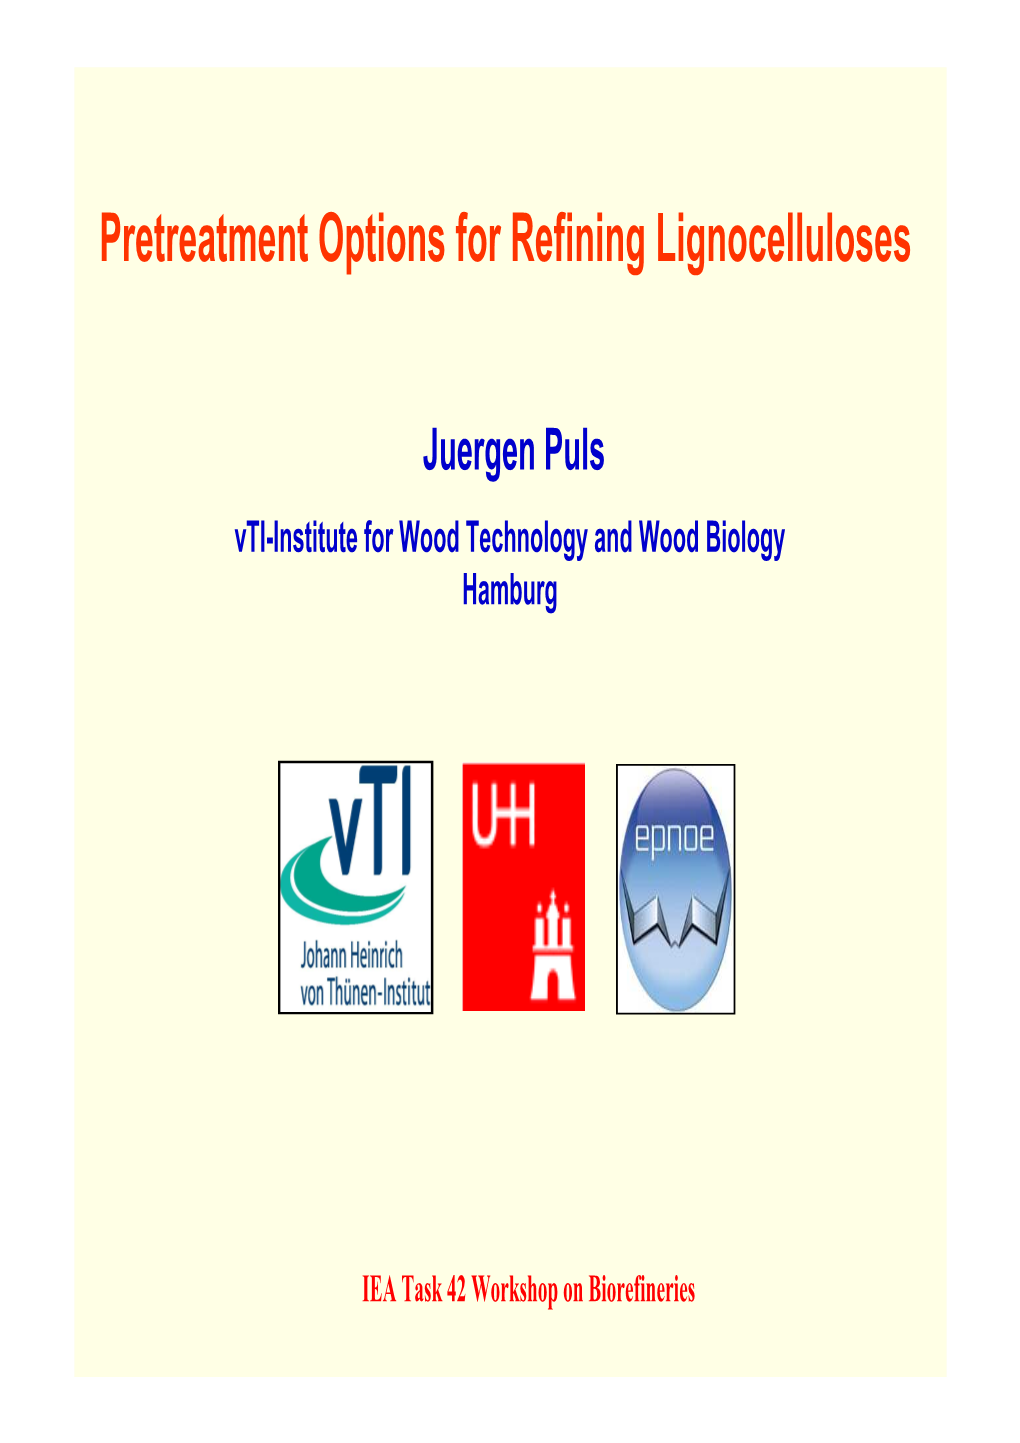 Pretreatment Options for Refining Lignocelluloses